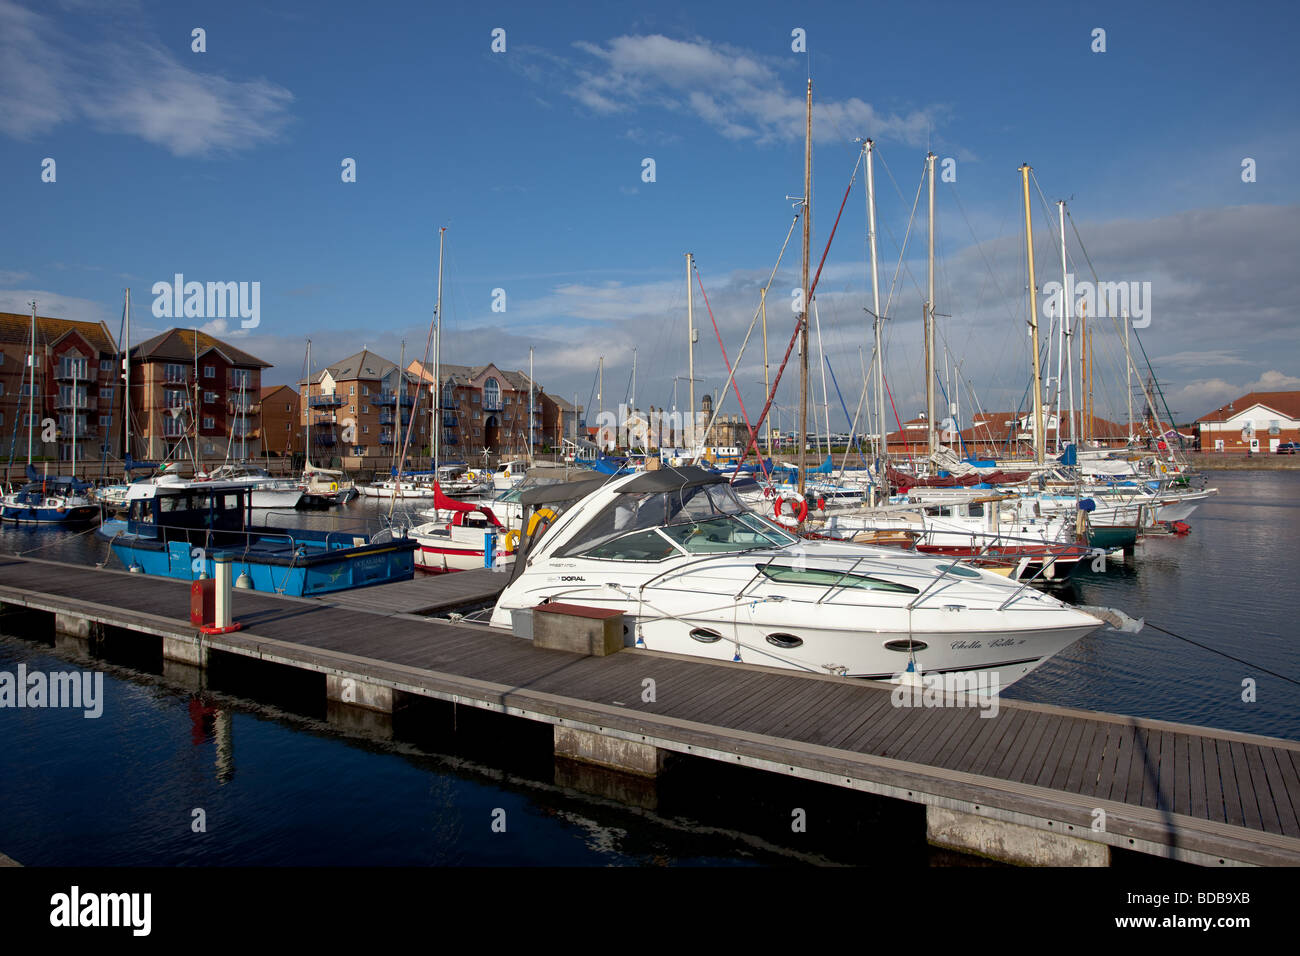 Boats and yachts stored in the Hartlepool Marina Stock Photo